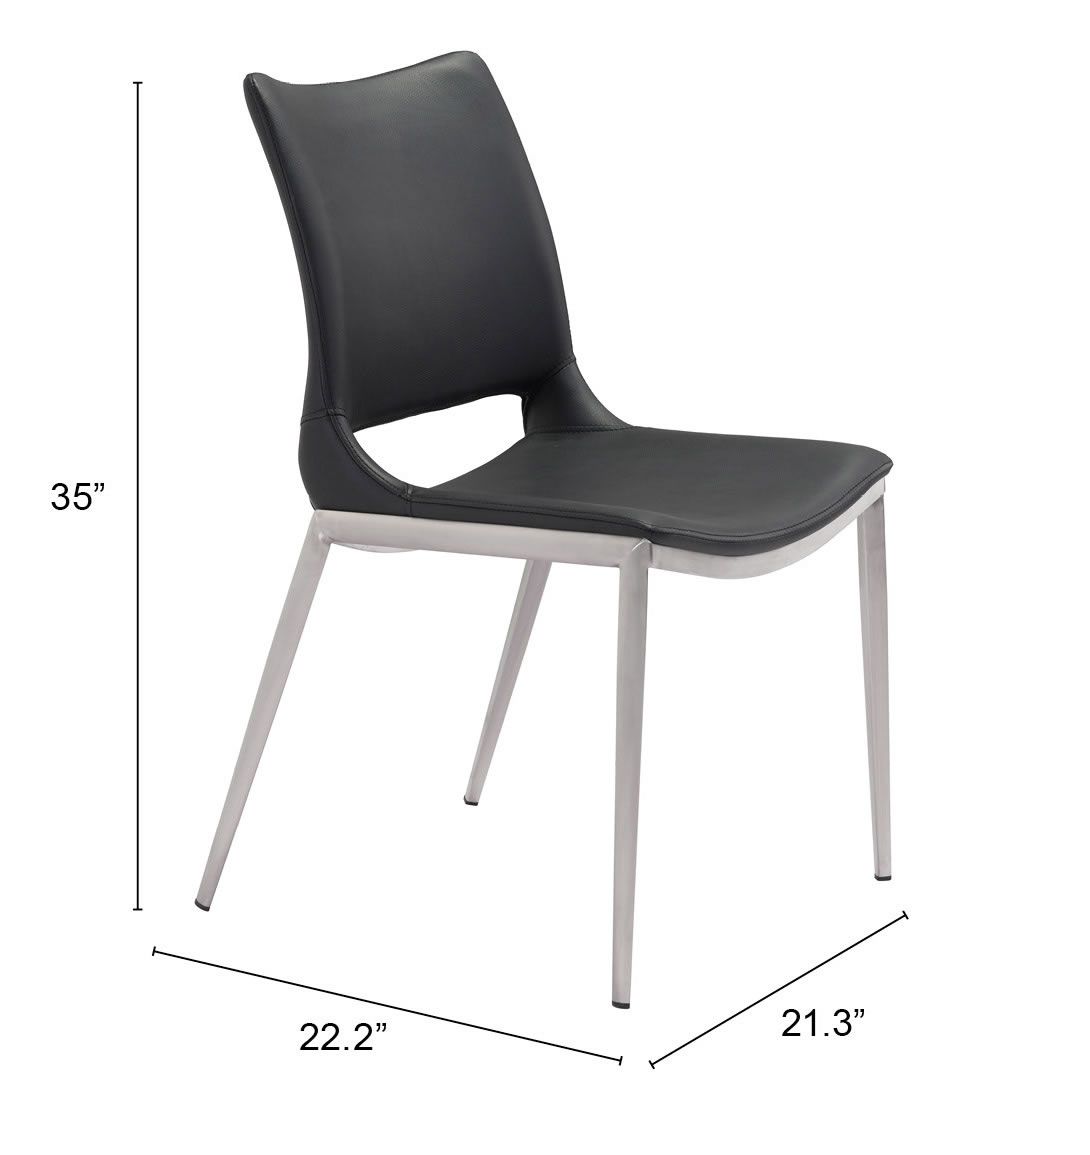 Ace Dining Chair Black & Silver